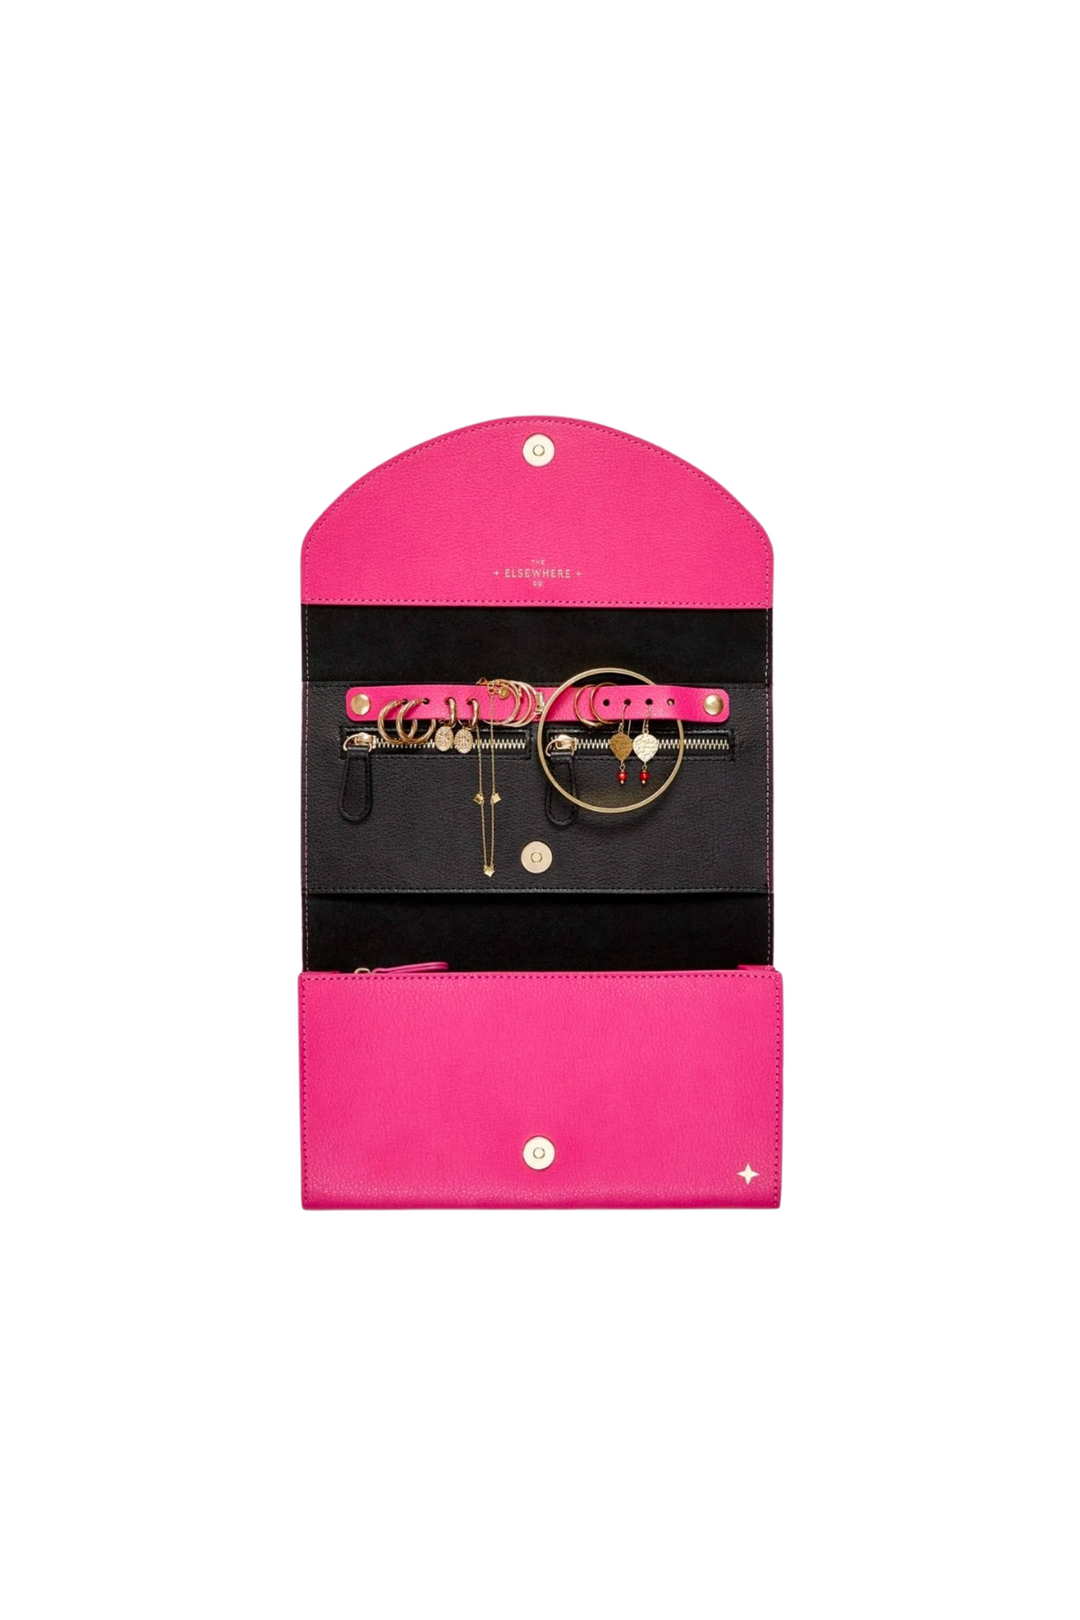 The Elsewhere Co. Sustainable Leather Wallet in Paradise Pink, available on ZERRIN with free Singapore shipping